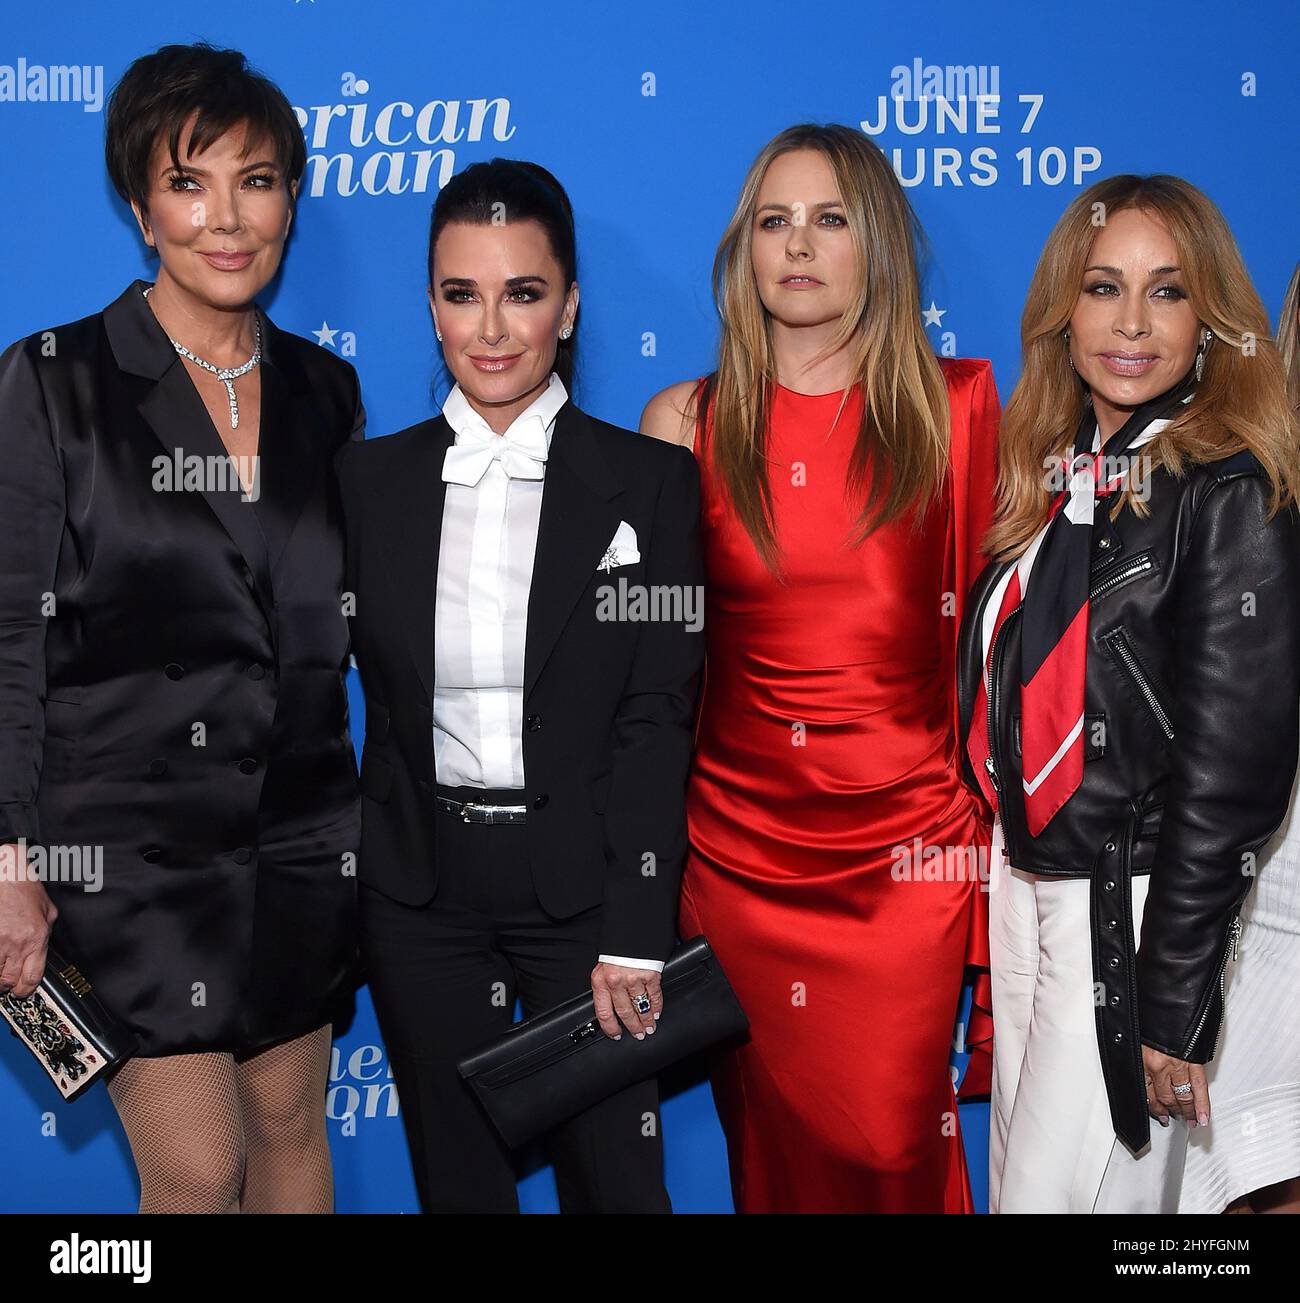 Kris Jenner Kyle Richards Alicia Silverstone And Faye Resnick Attending The American Women